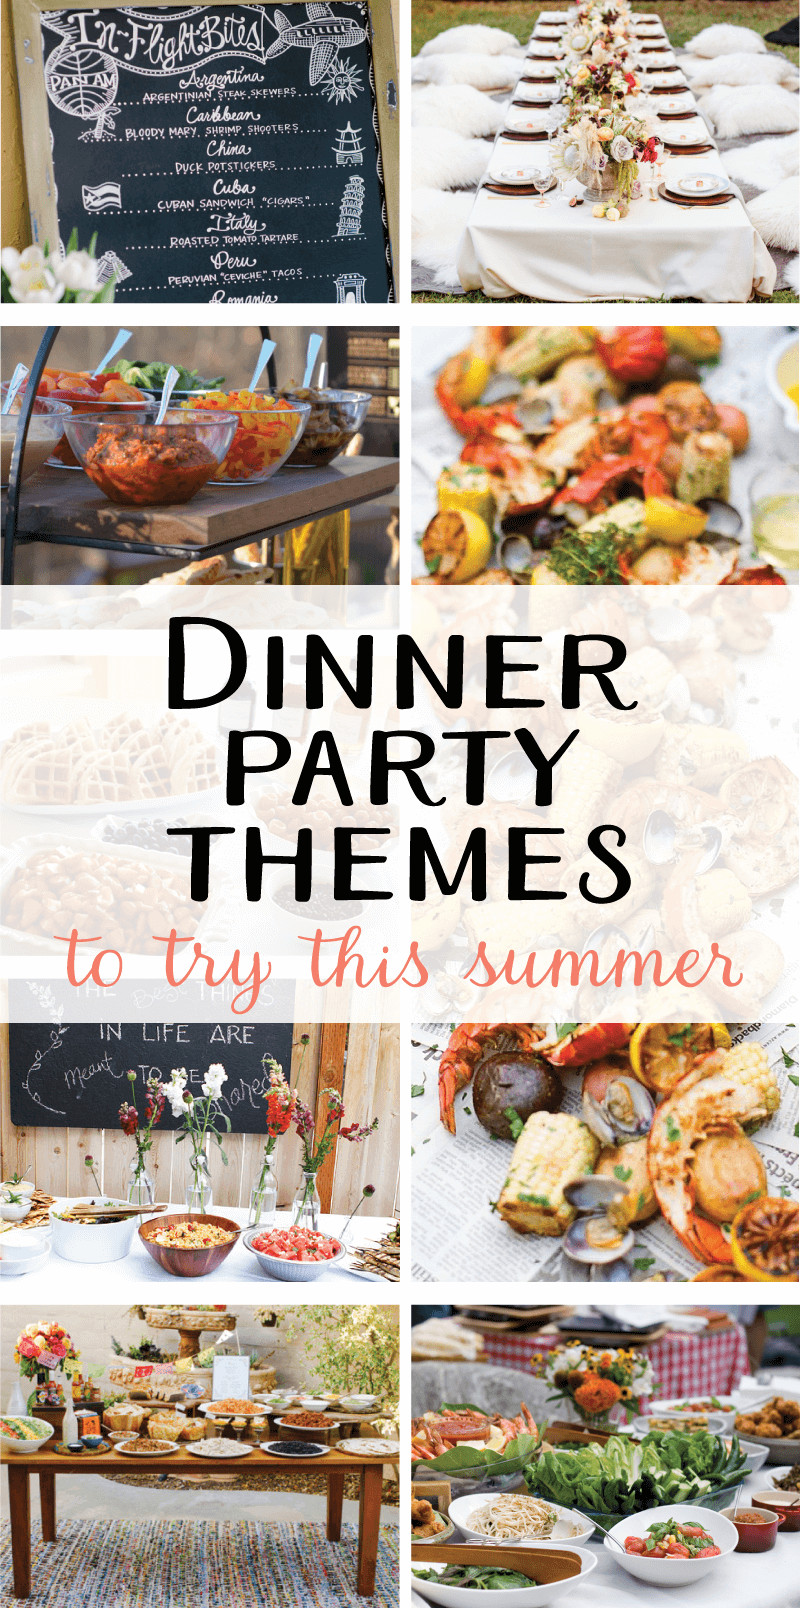 Summer Dinner Party Recipes Ideas
 9 Creative Dinner Party Themes to Try this Summer on